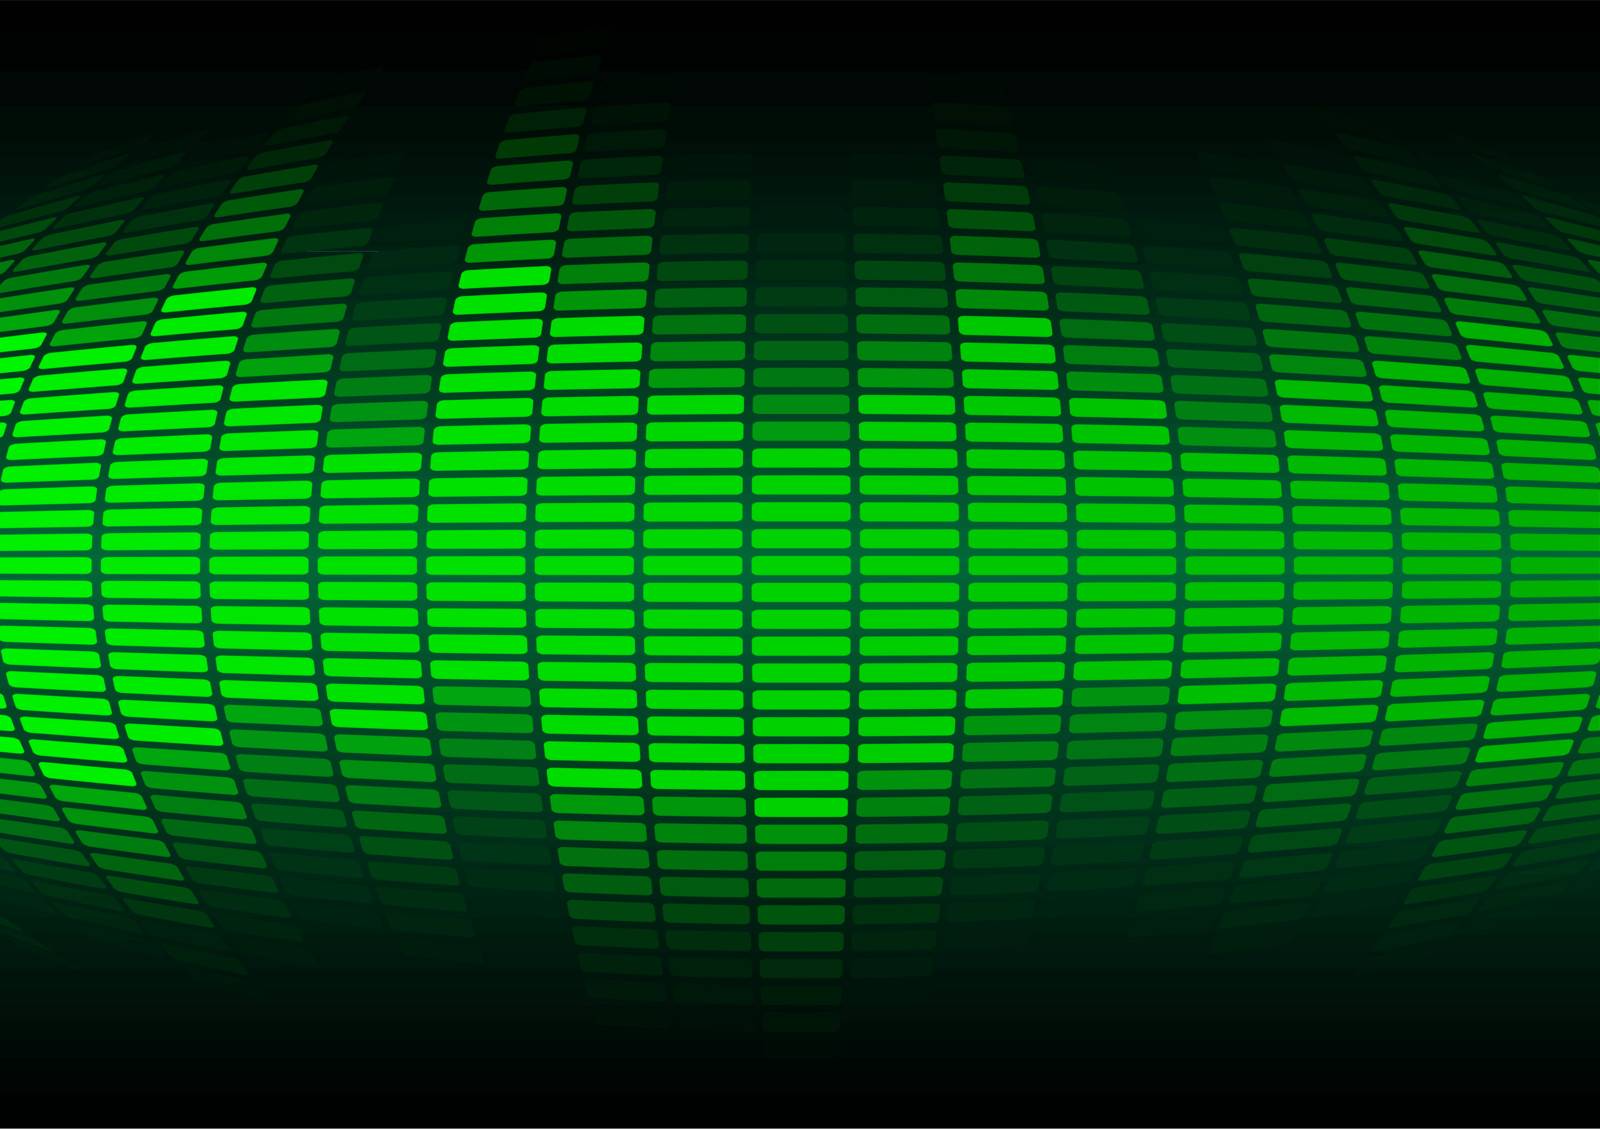 Abstract Background - Green Equalizer on Black Background